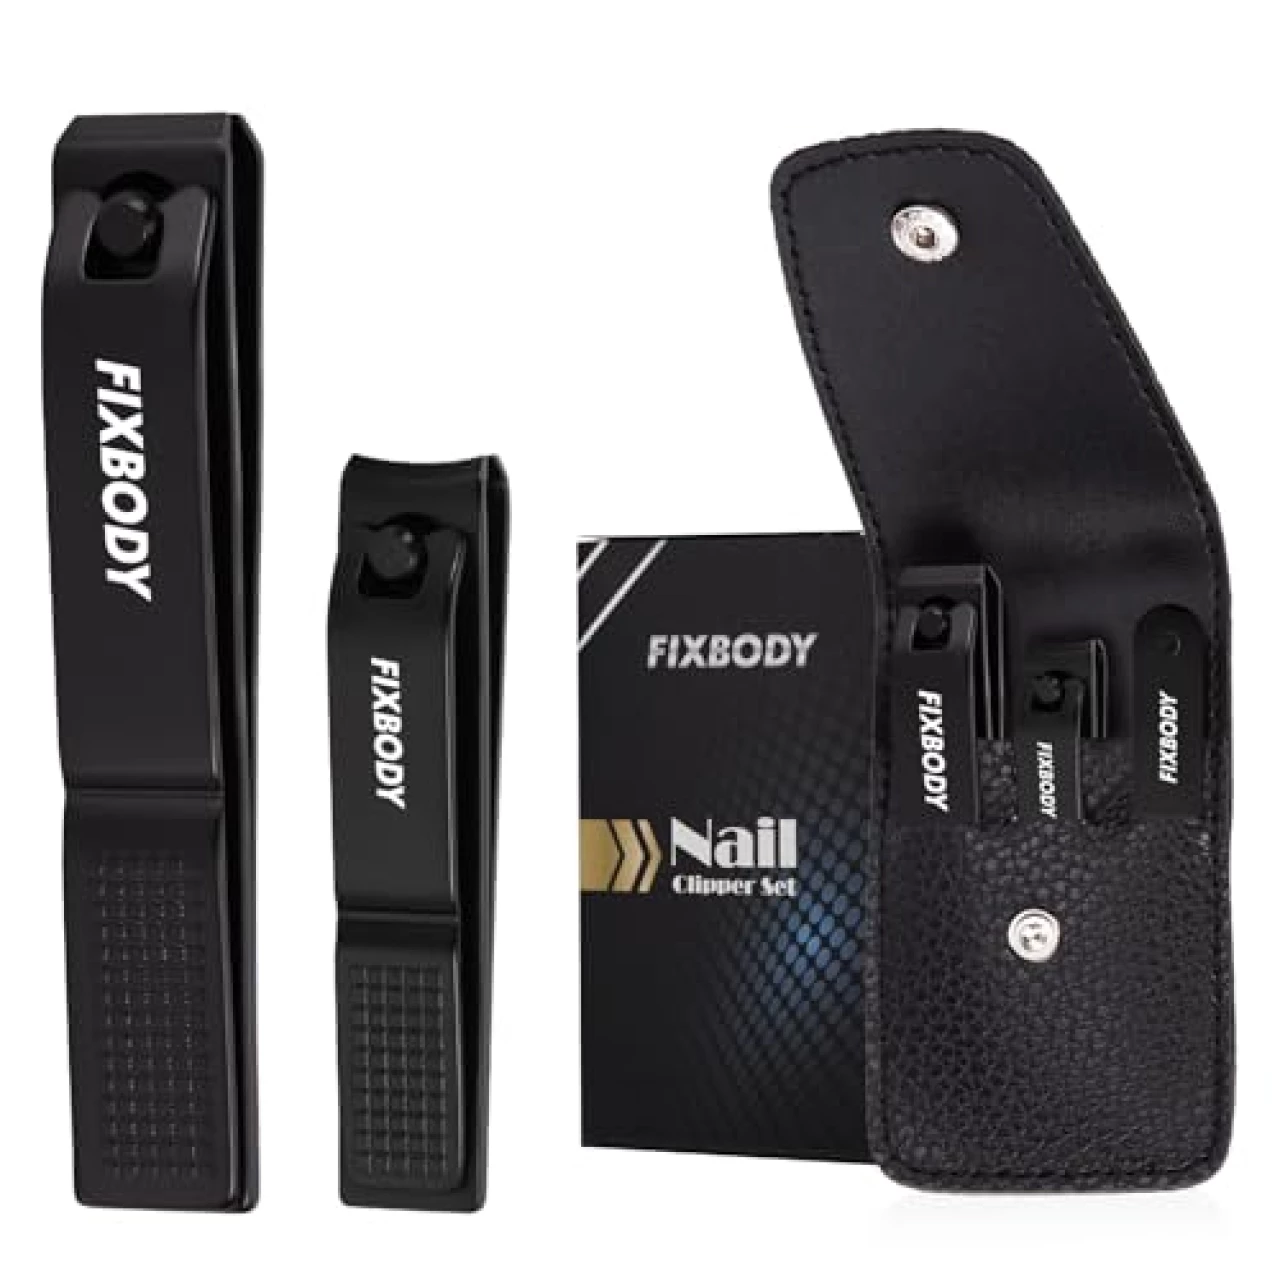 FIXBODY Nail Clipper Set - Black Stainless Steel Fingernails &amp; Toenails Clippers &amp; Nail File Sharp Nail Cutter